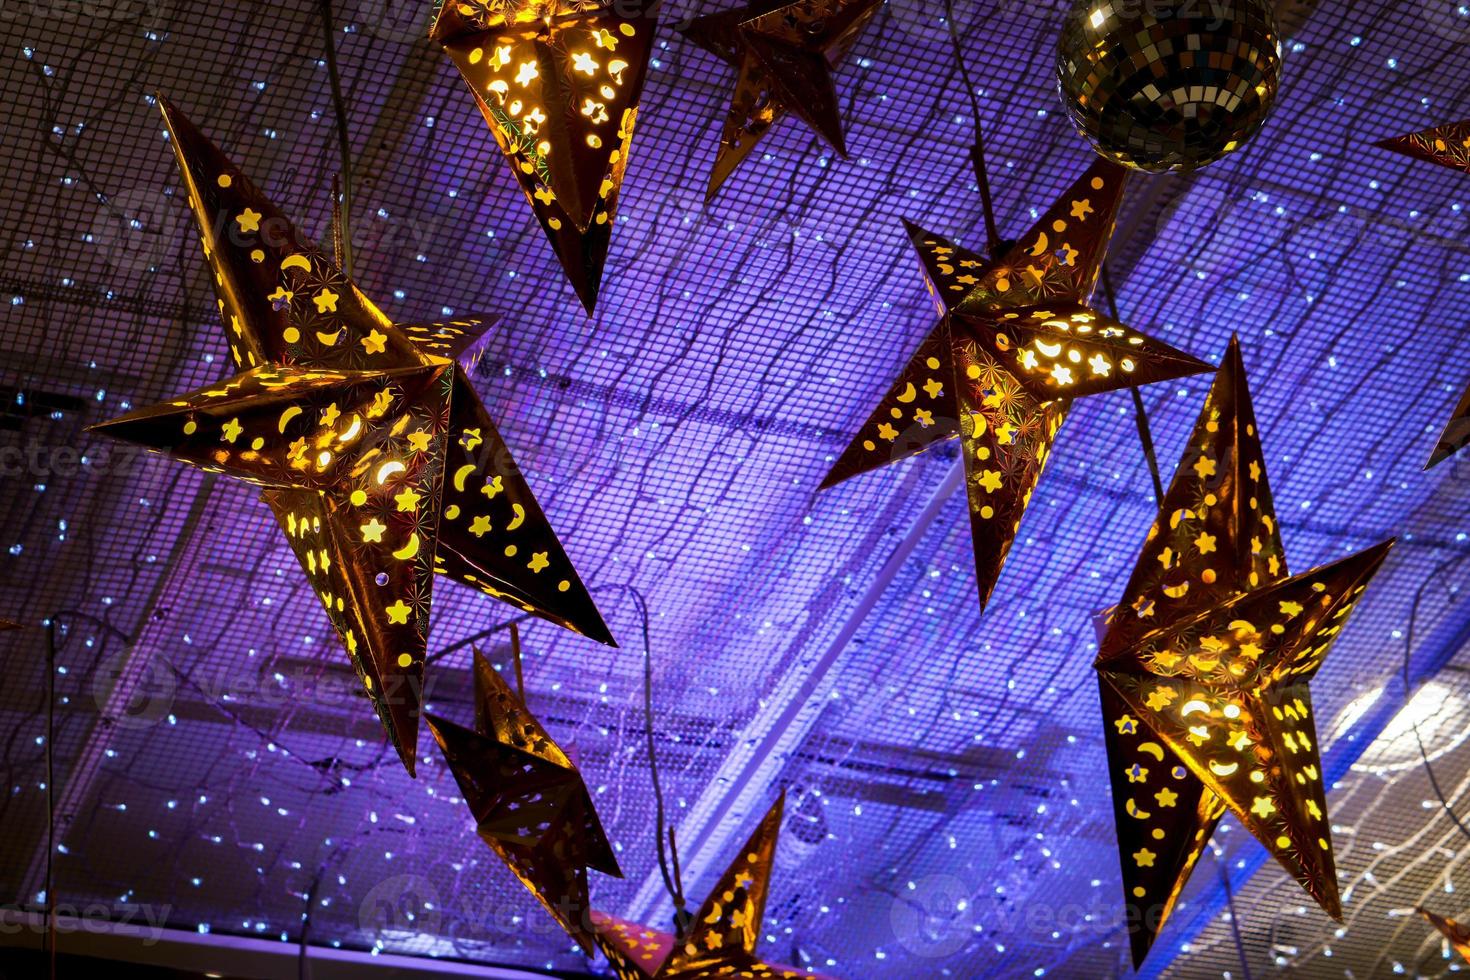 Decorated lighting golden stars and blue lights of decorated lighting  hanged on ceiling in the room for ready on the Christmas night party. photo